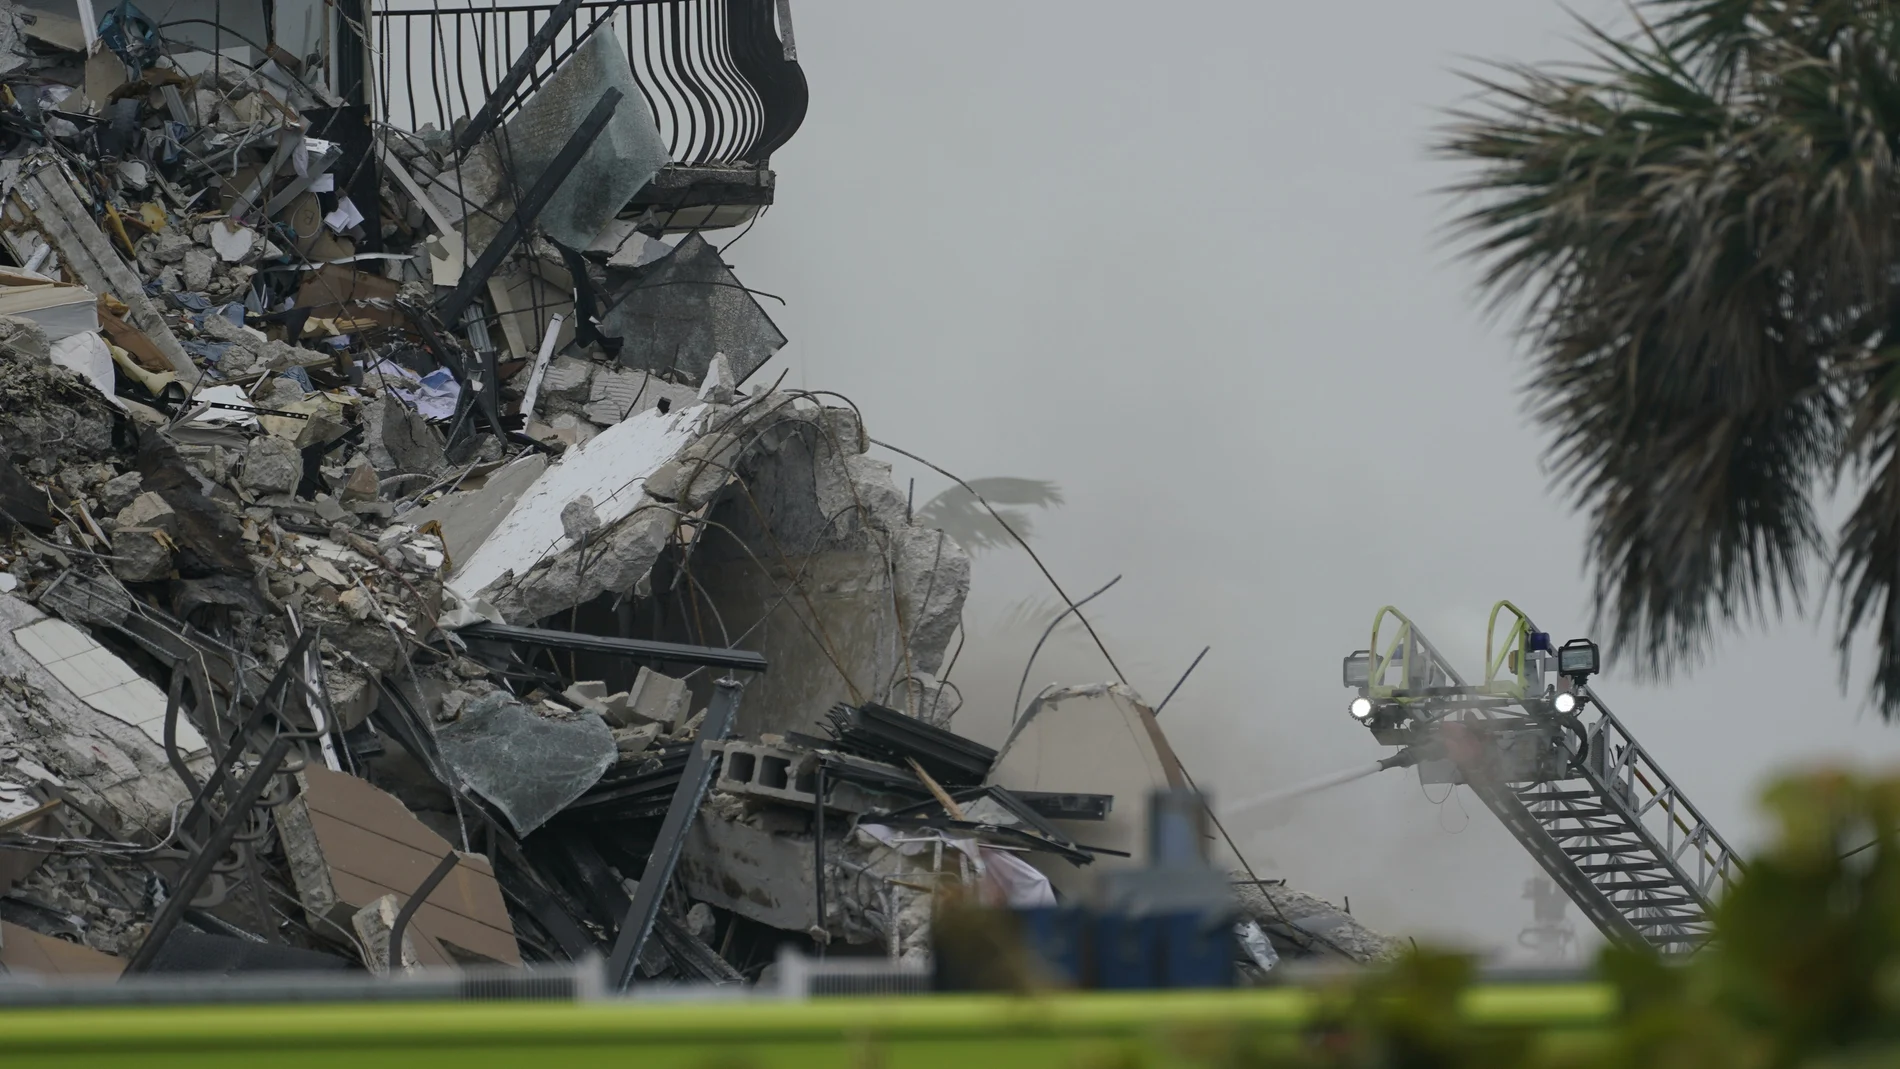 Firefighters use a ladder hose as smoke comes out of the rubble of a partially collapsed building, Thursday, June 24, 2021, in Surfside, Fla. (AP Photo/Wilfredo Lee)